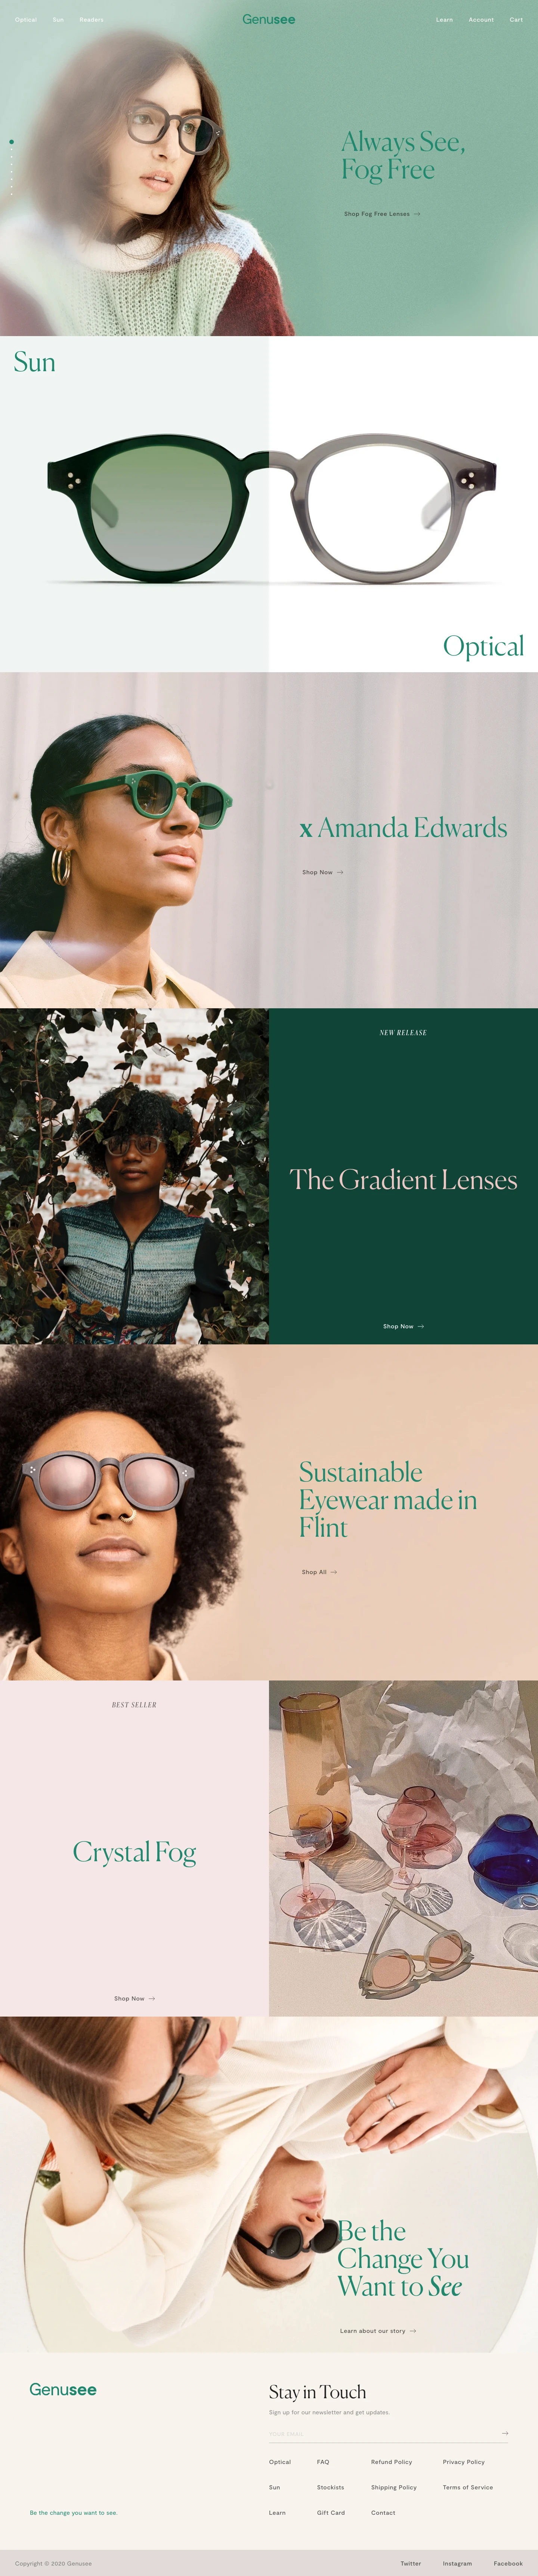 Genusee Landing Page Example: Genusee eyewear is Made in Flint, Michigan from recycled plastic water bottles as a result of the Flint Water Crisis. Every purchase upcycles 15 single-use water bottles and creates jobs for returning citizens.